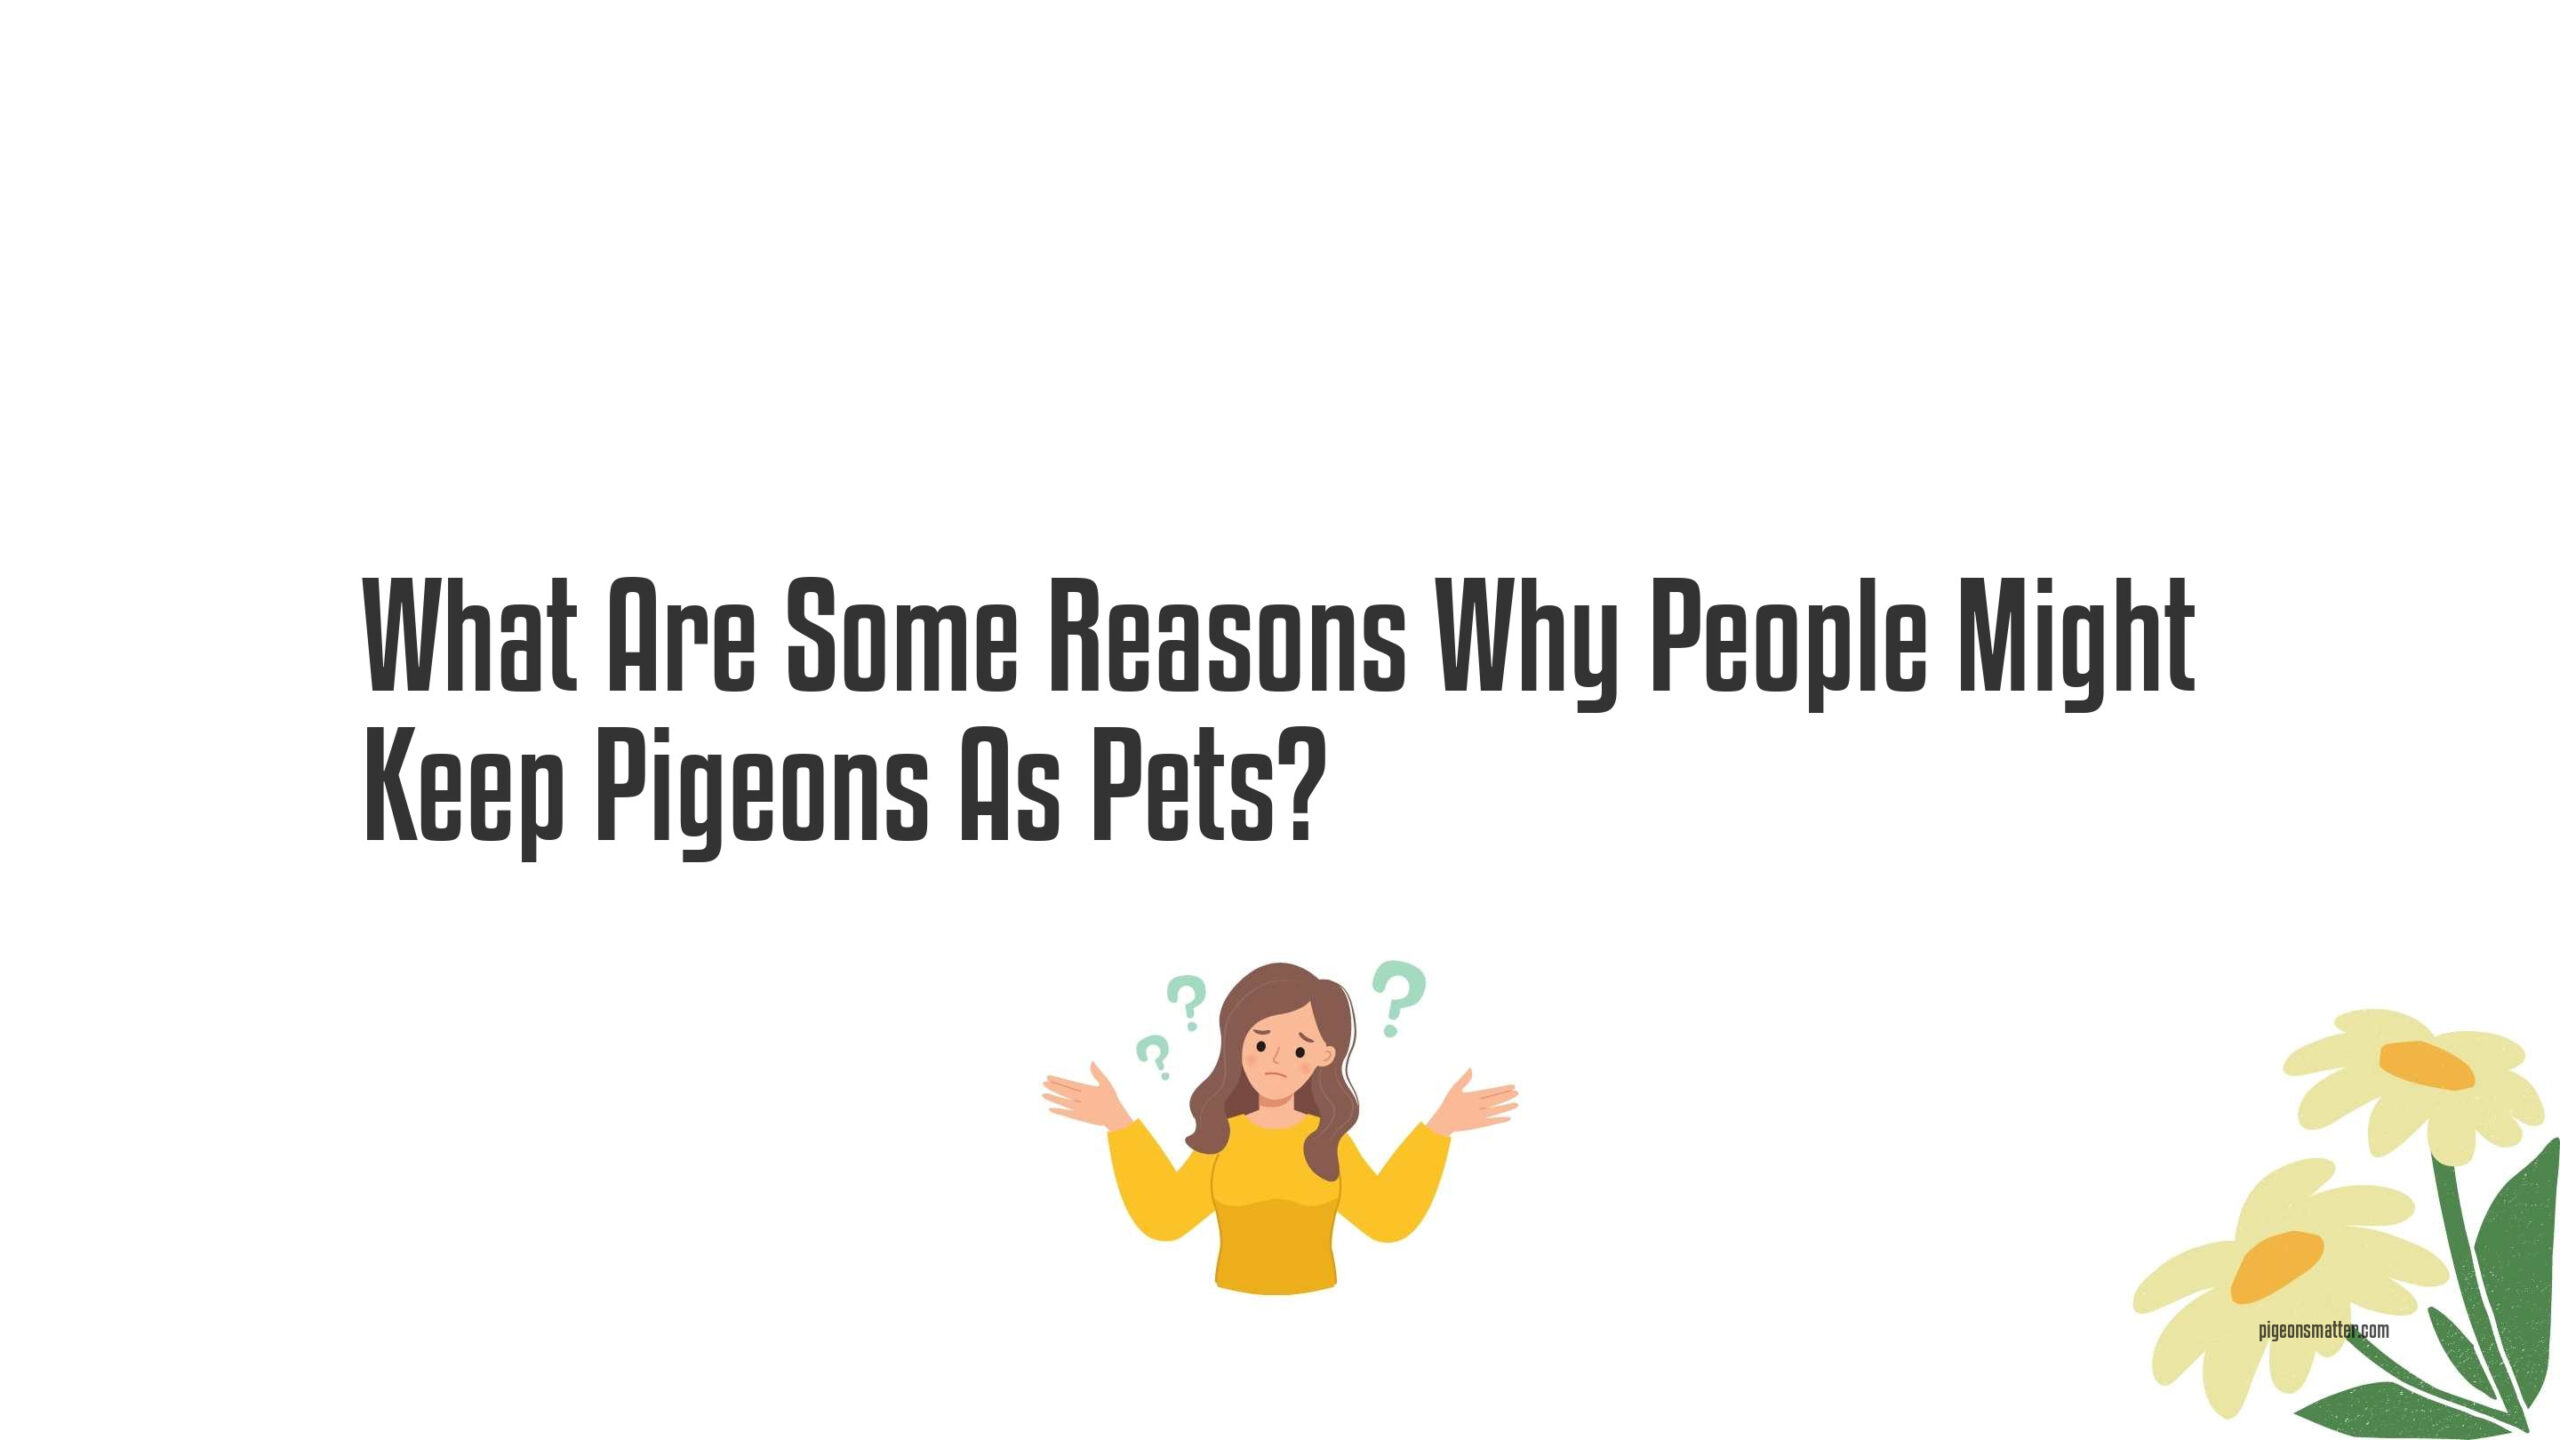 What Are Some Reasons Why People Might Keep Pigeons As Pets?